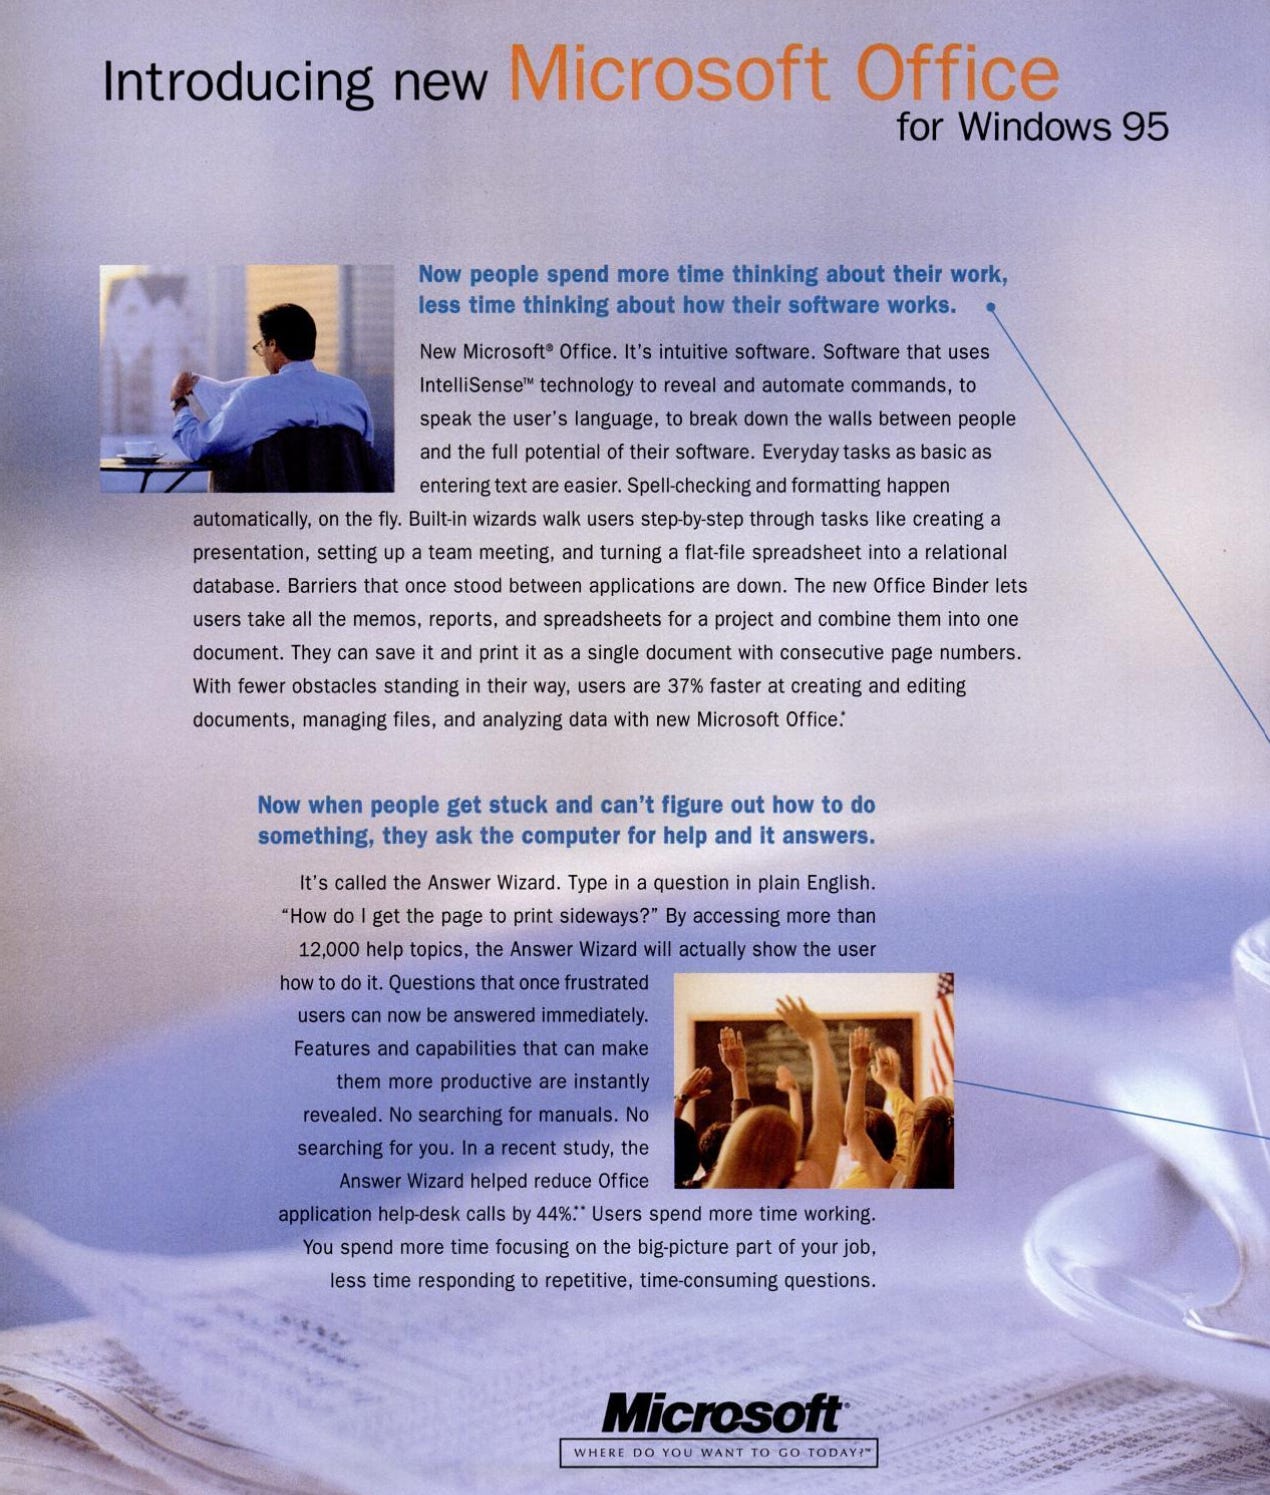 Introducing new Microsoft Office for Windows 95